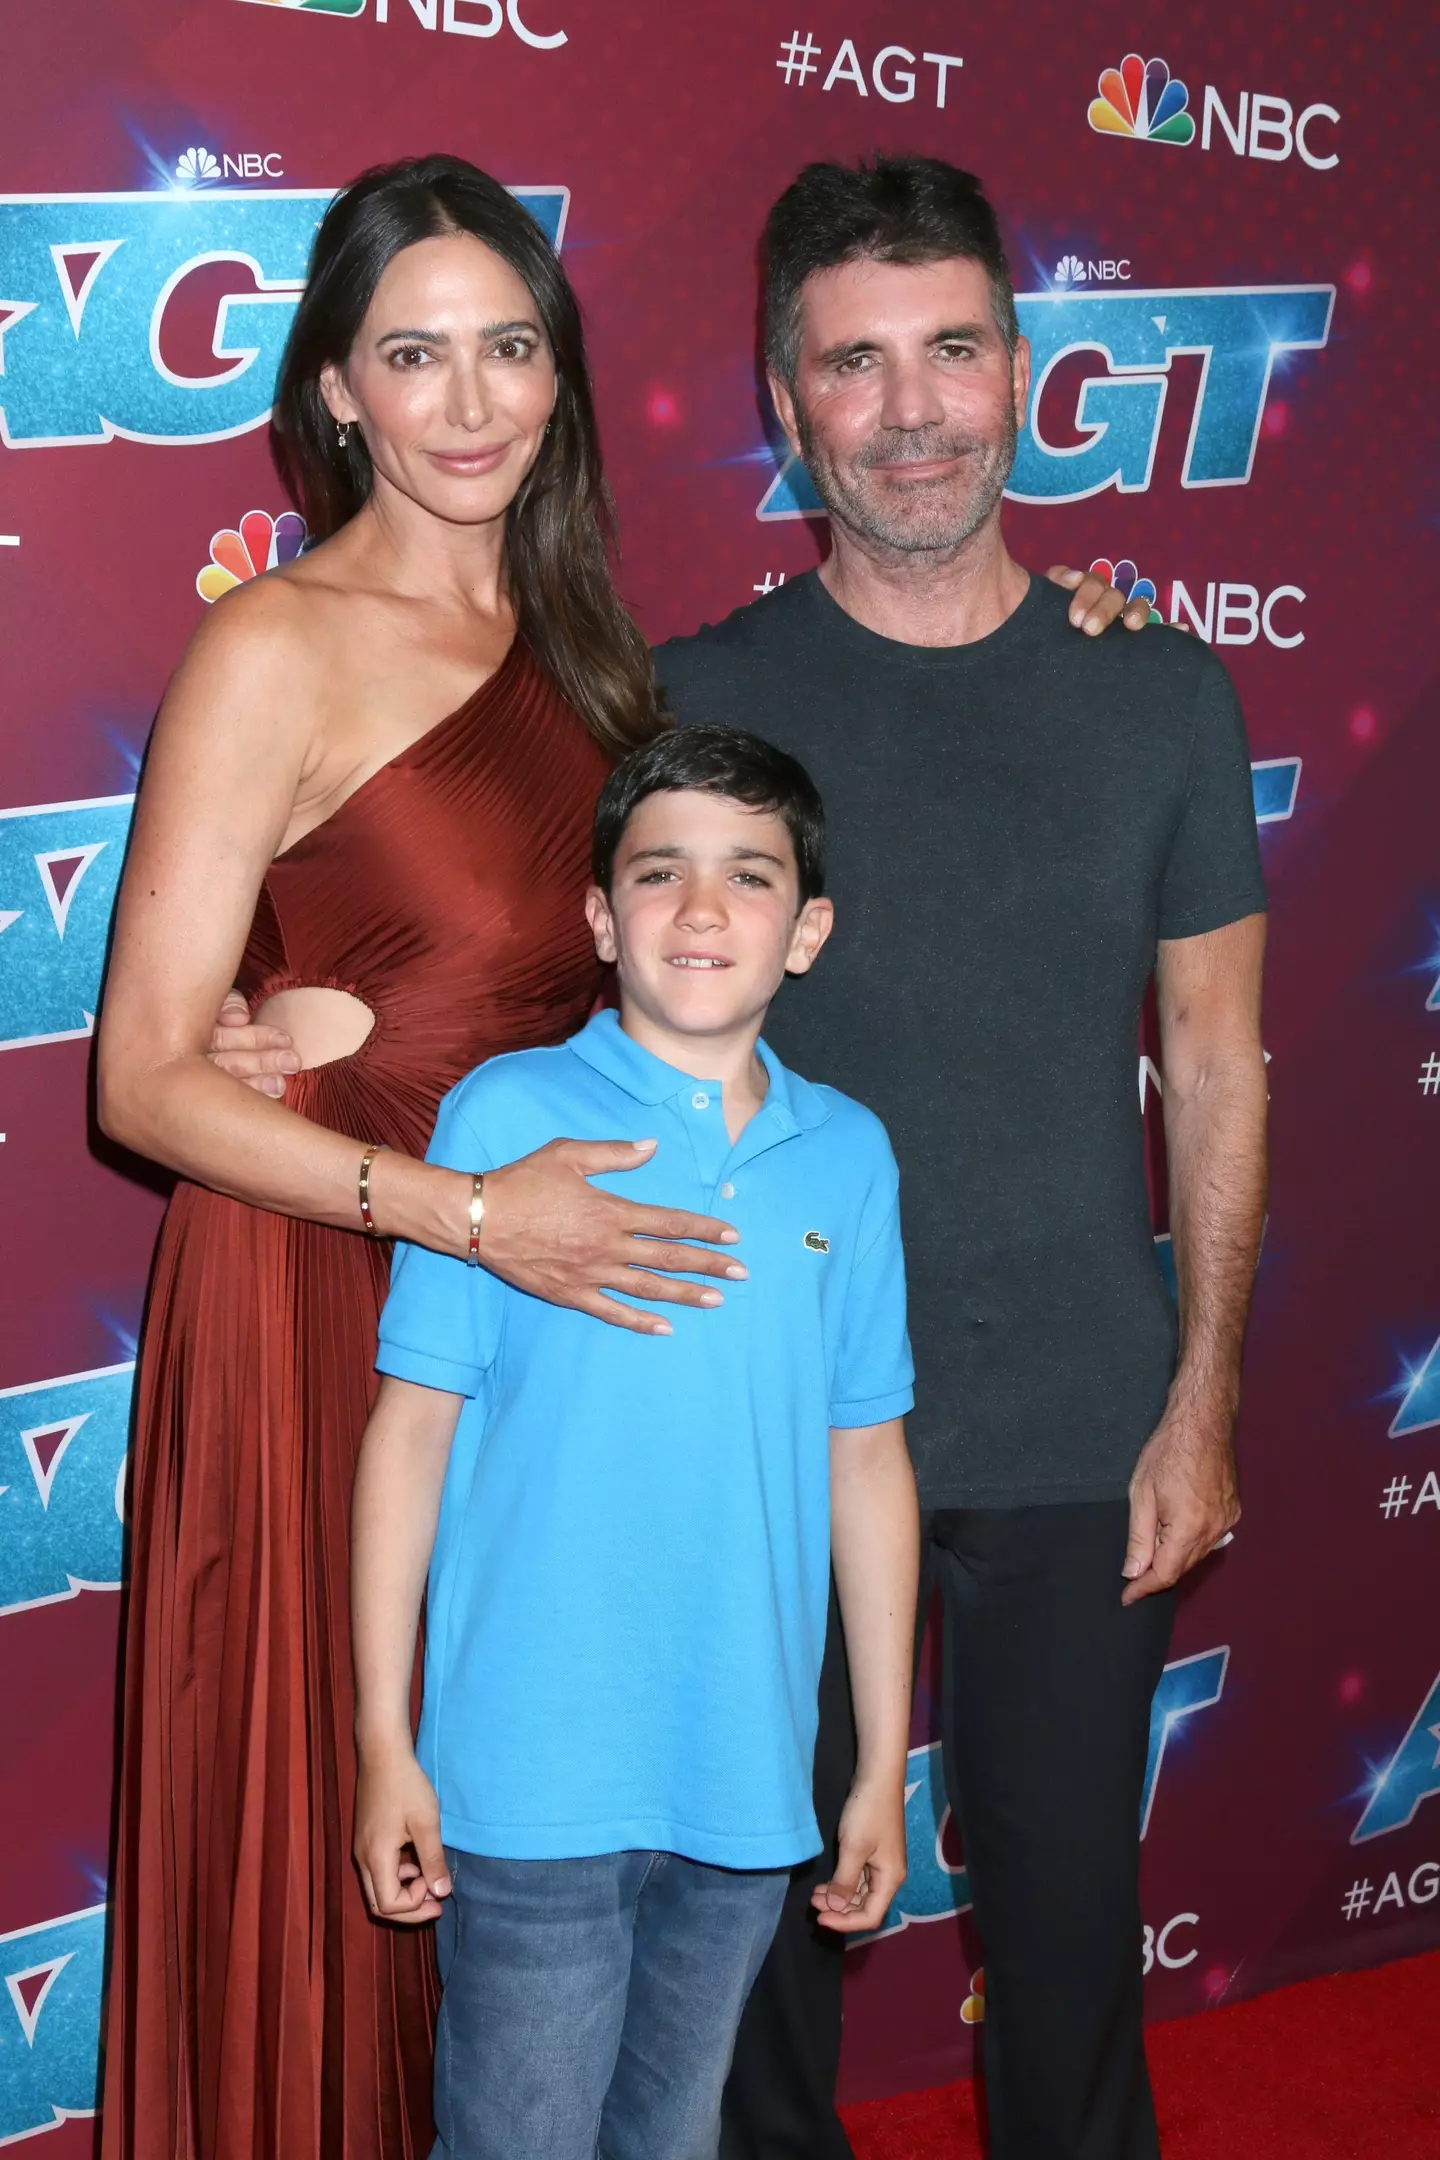 Simon Cowell with fiancée Lauren Silverman and son Eric.